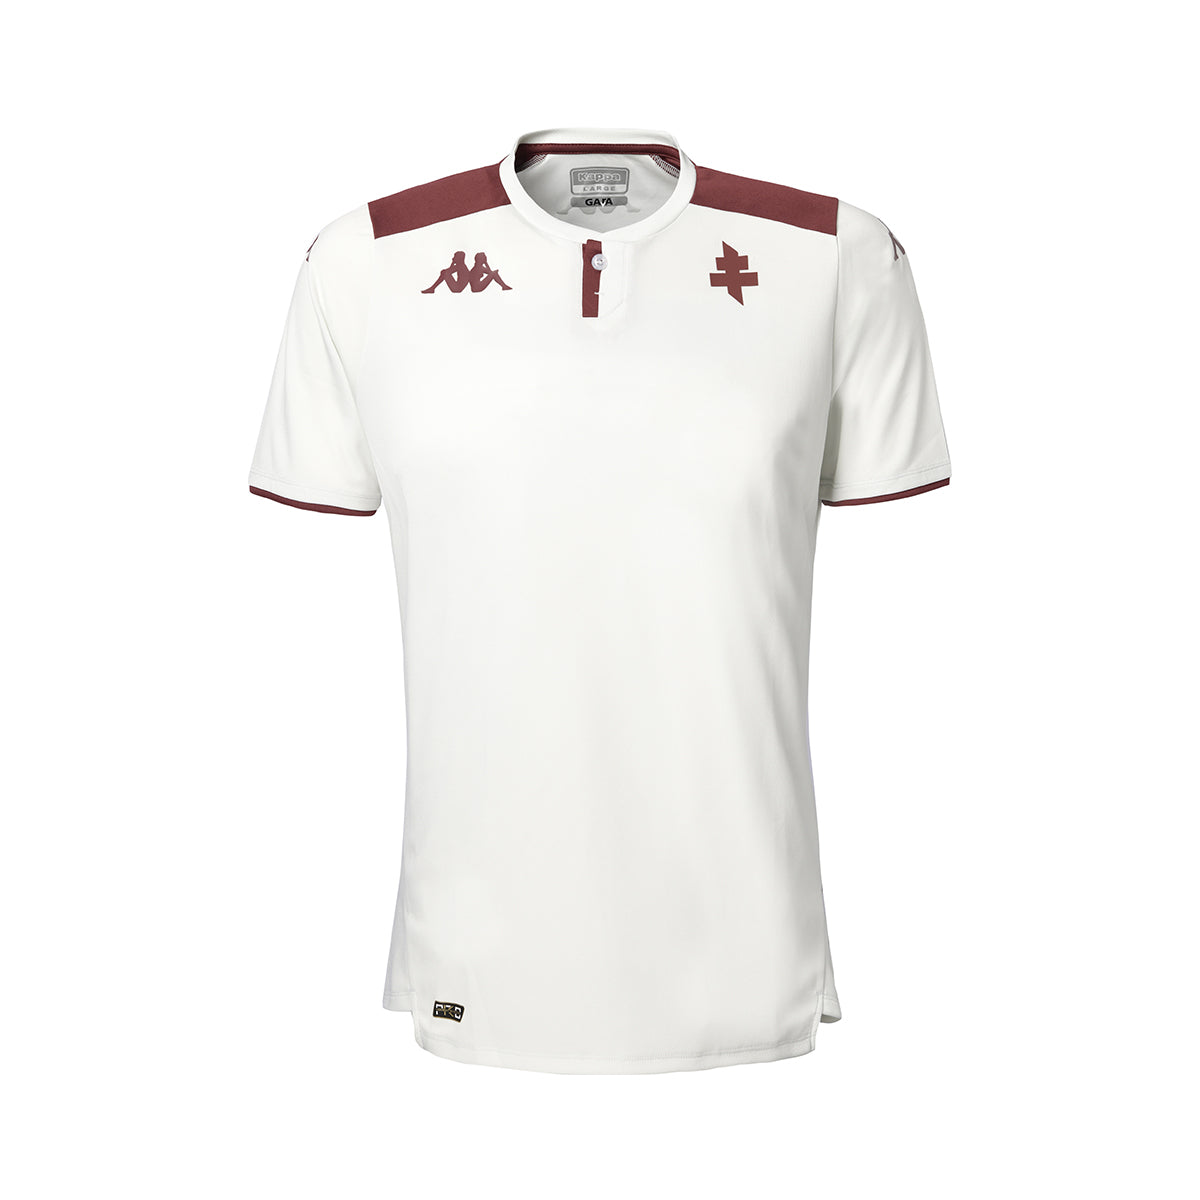 Maillot Abiang Pro 5 FC Metz Gris homme - image 1